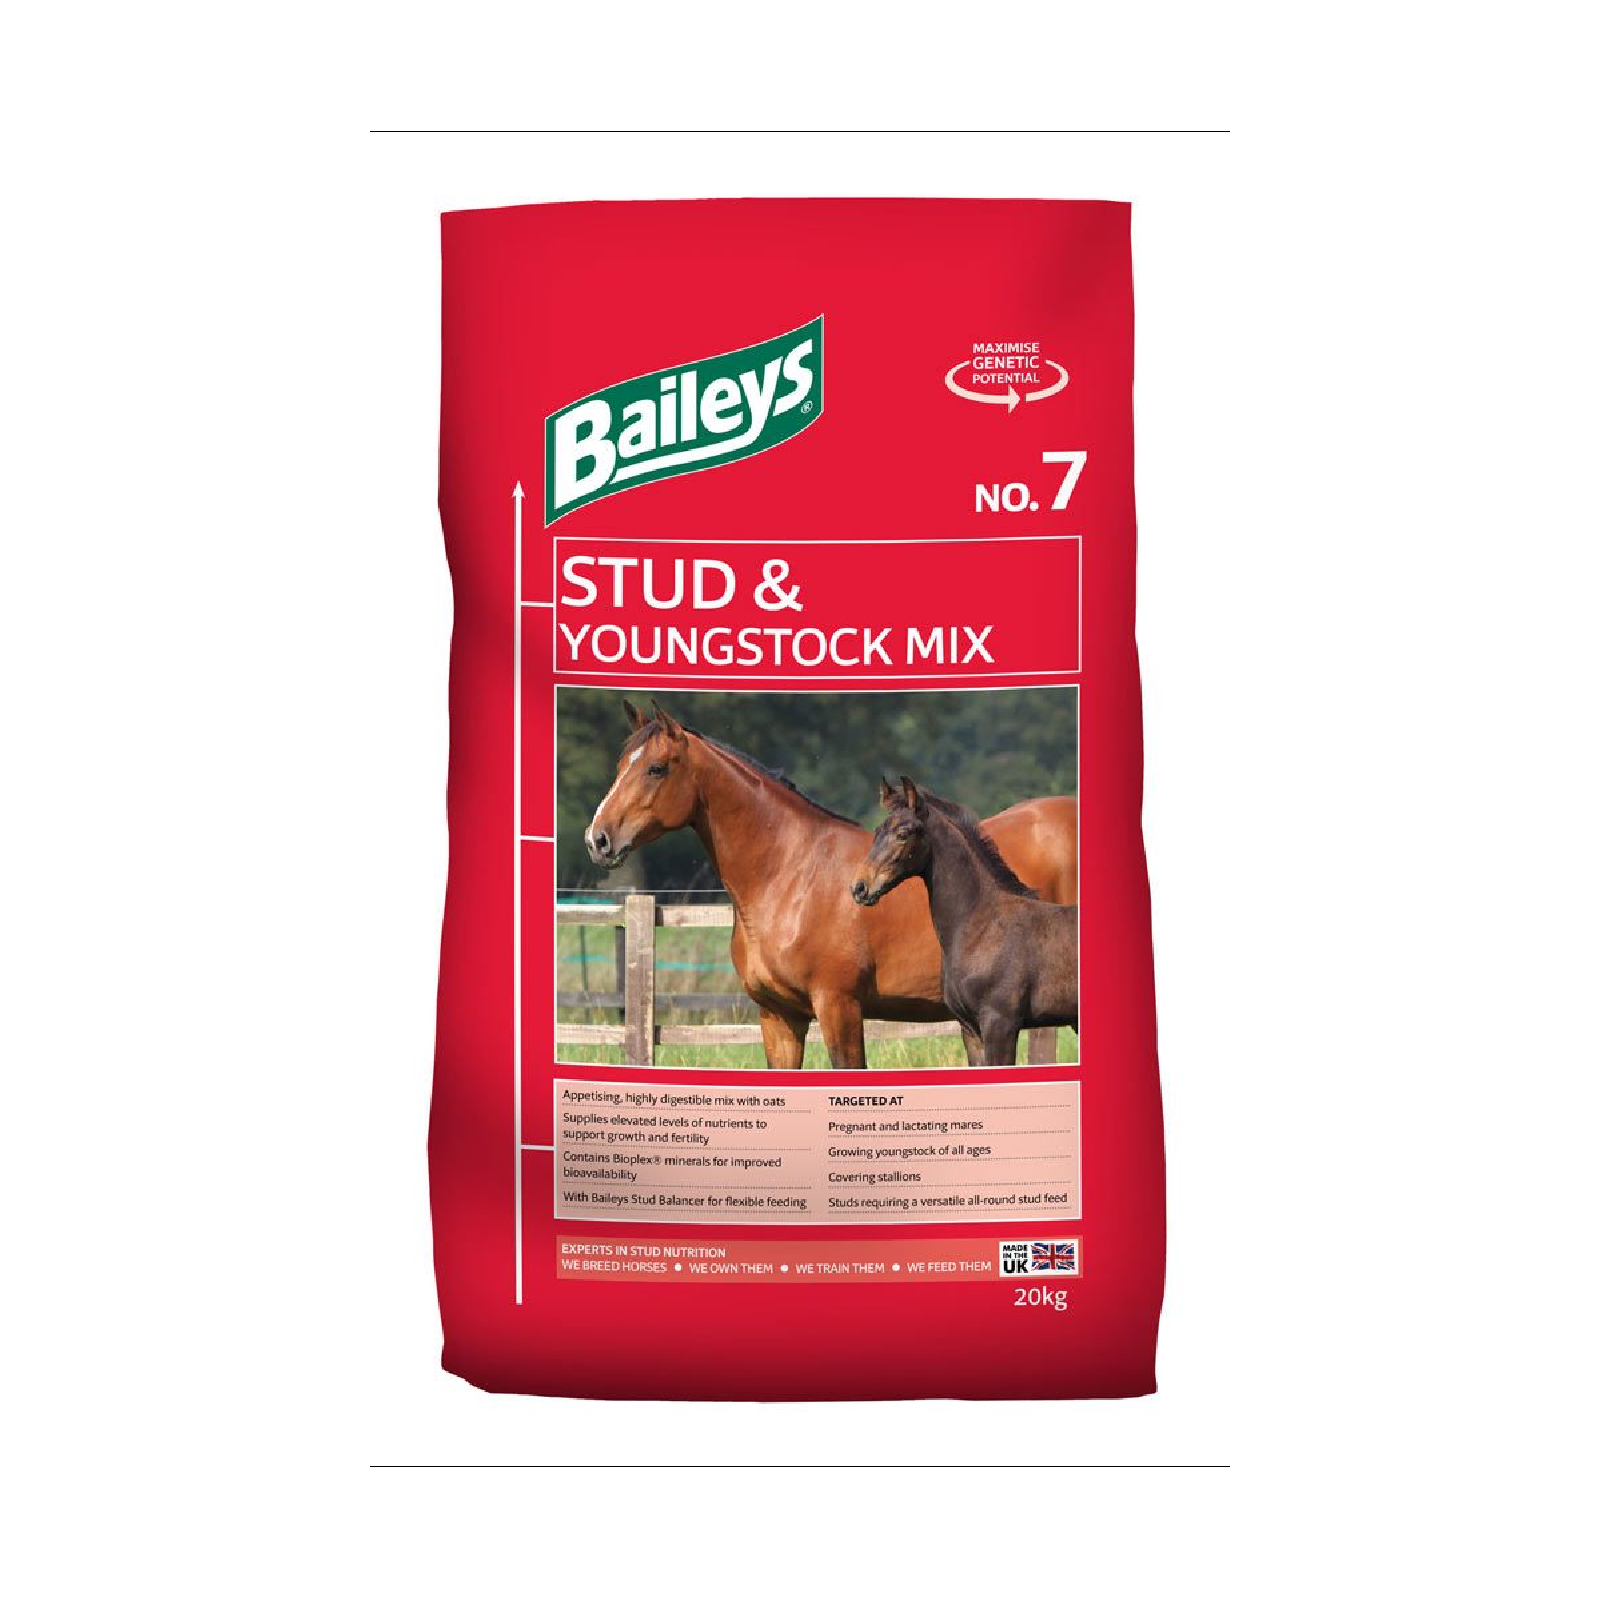 Baileys No 7 Stud & Youngstock Mix 20kg